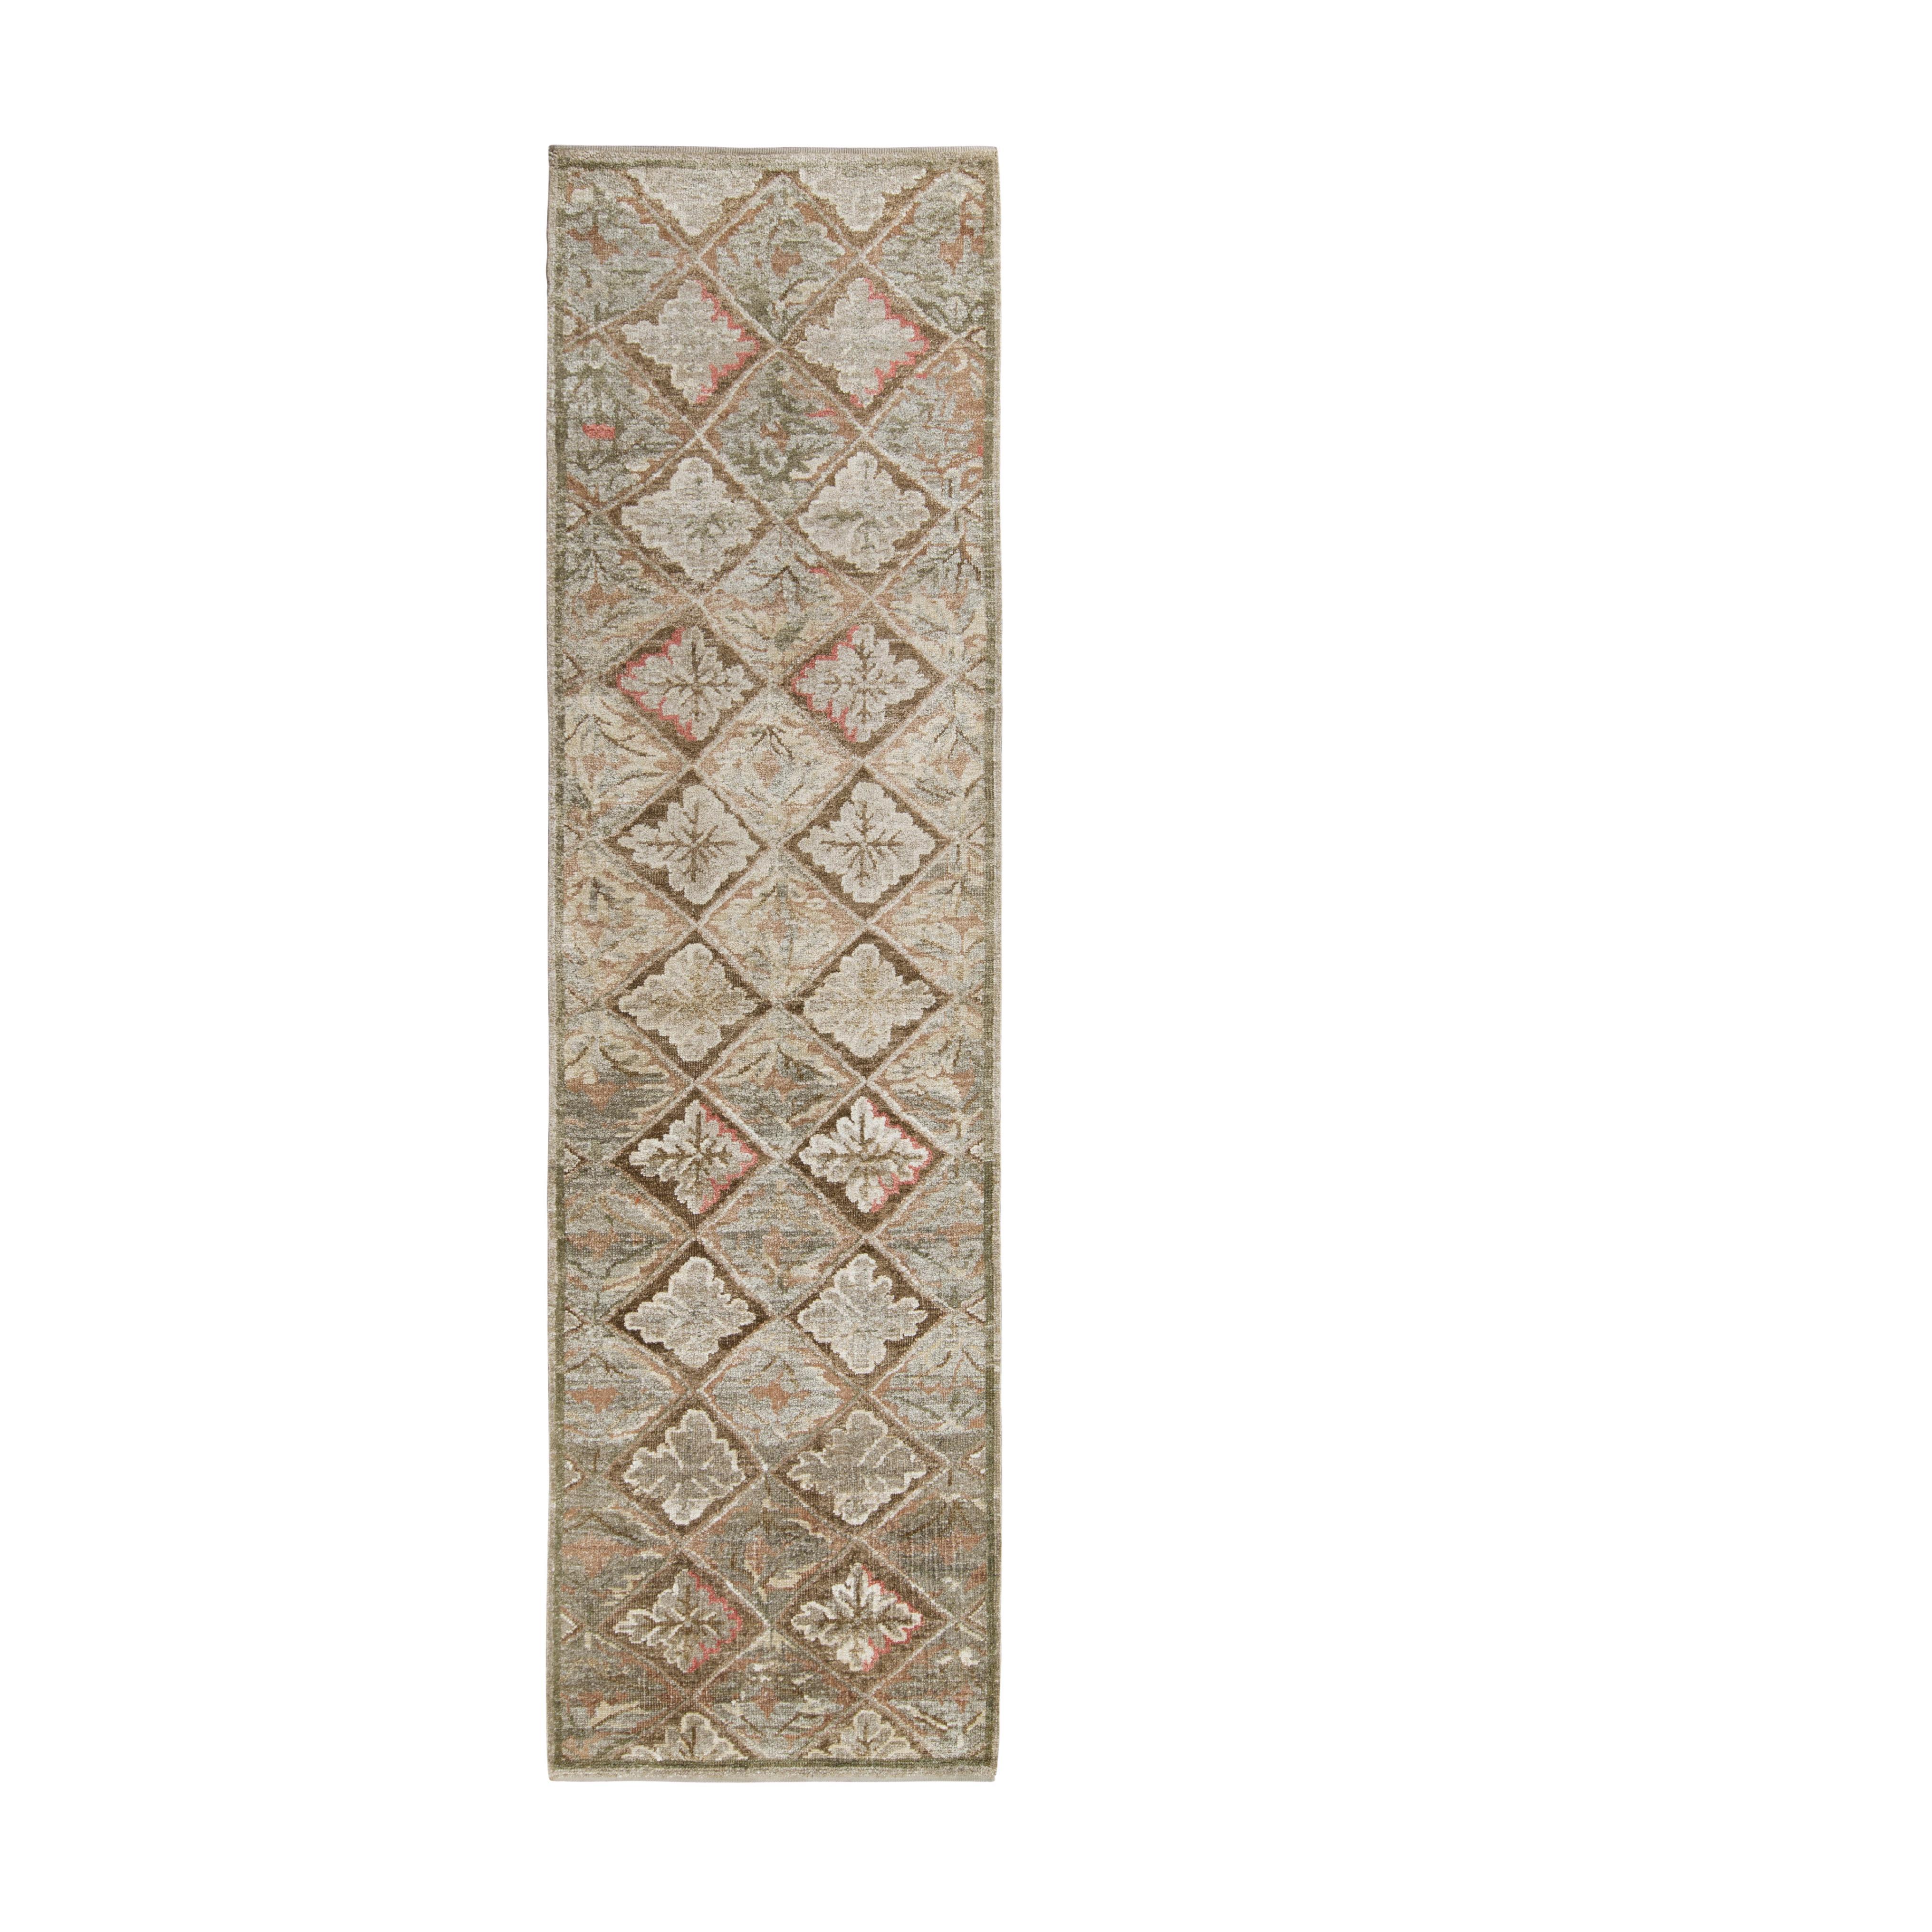 Tapis & Kilim's French Aubusson Style Runner in Green, Beige-Brown Floral Pattern (en anglais)